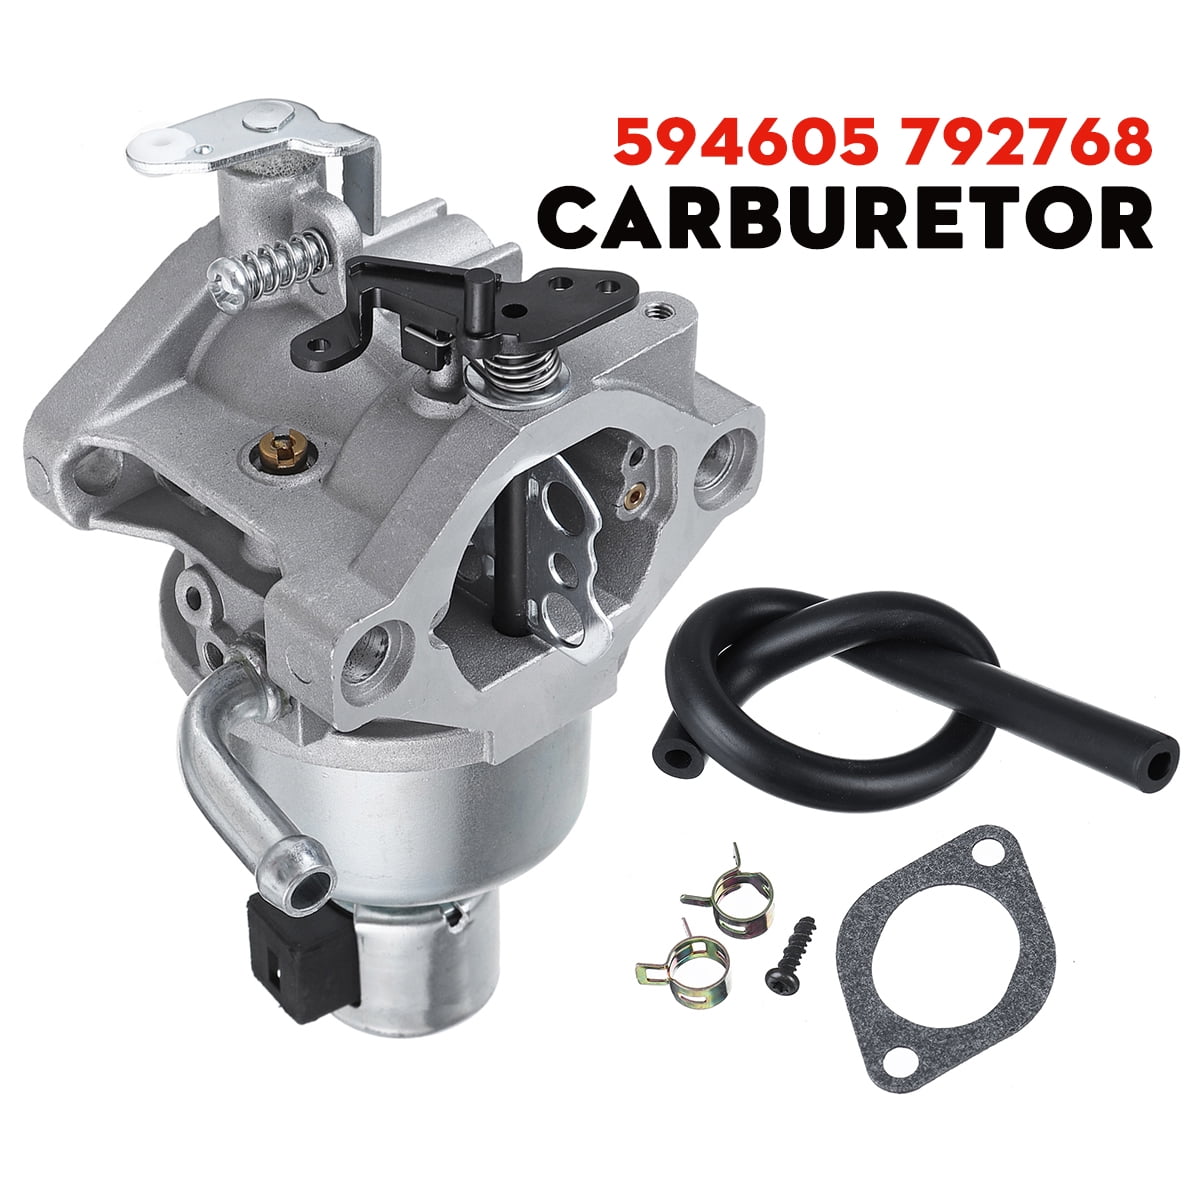 Worldwide-needs Carburetor For Briggs & Stratton Carb 792768 Durable 